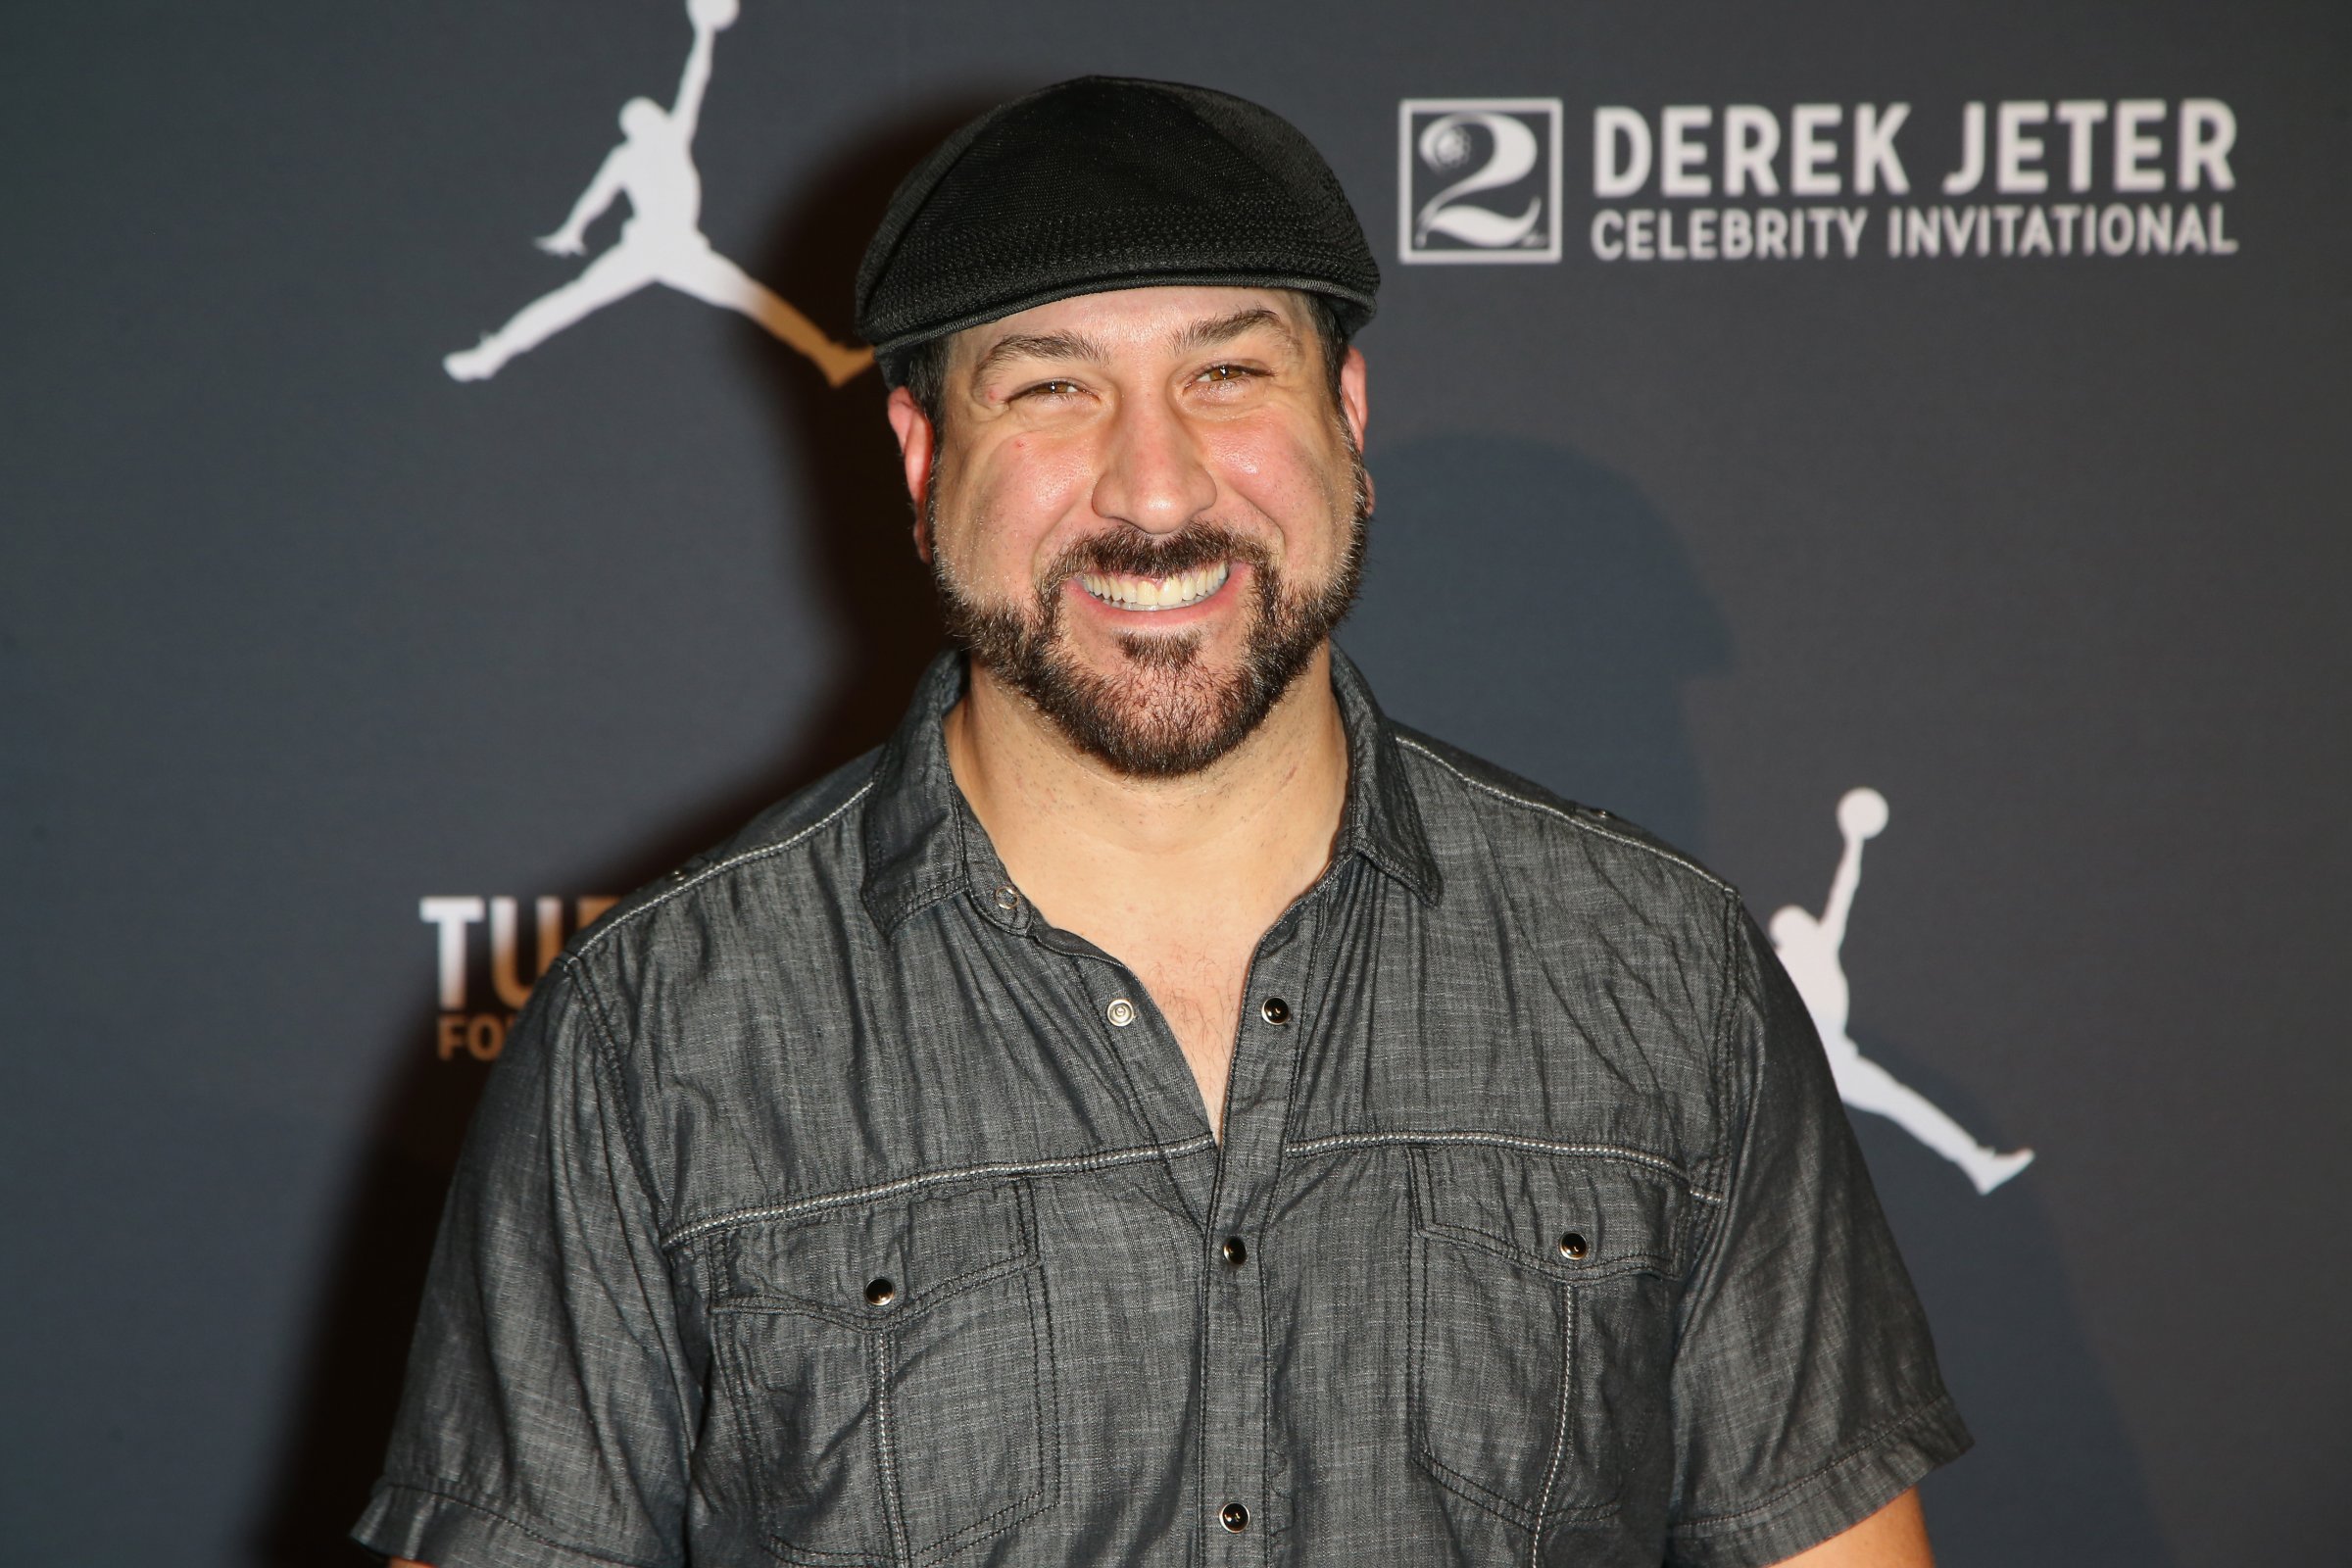 Singer Joey Fatone arrives at the Liquid Pool Lounge for the kickoff of Derek Jeter's celebrity invitational at the Aria Resort &amp; Casino on April 20, 2016 in Las Vegas, Nevada.